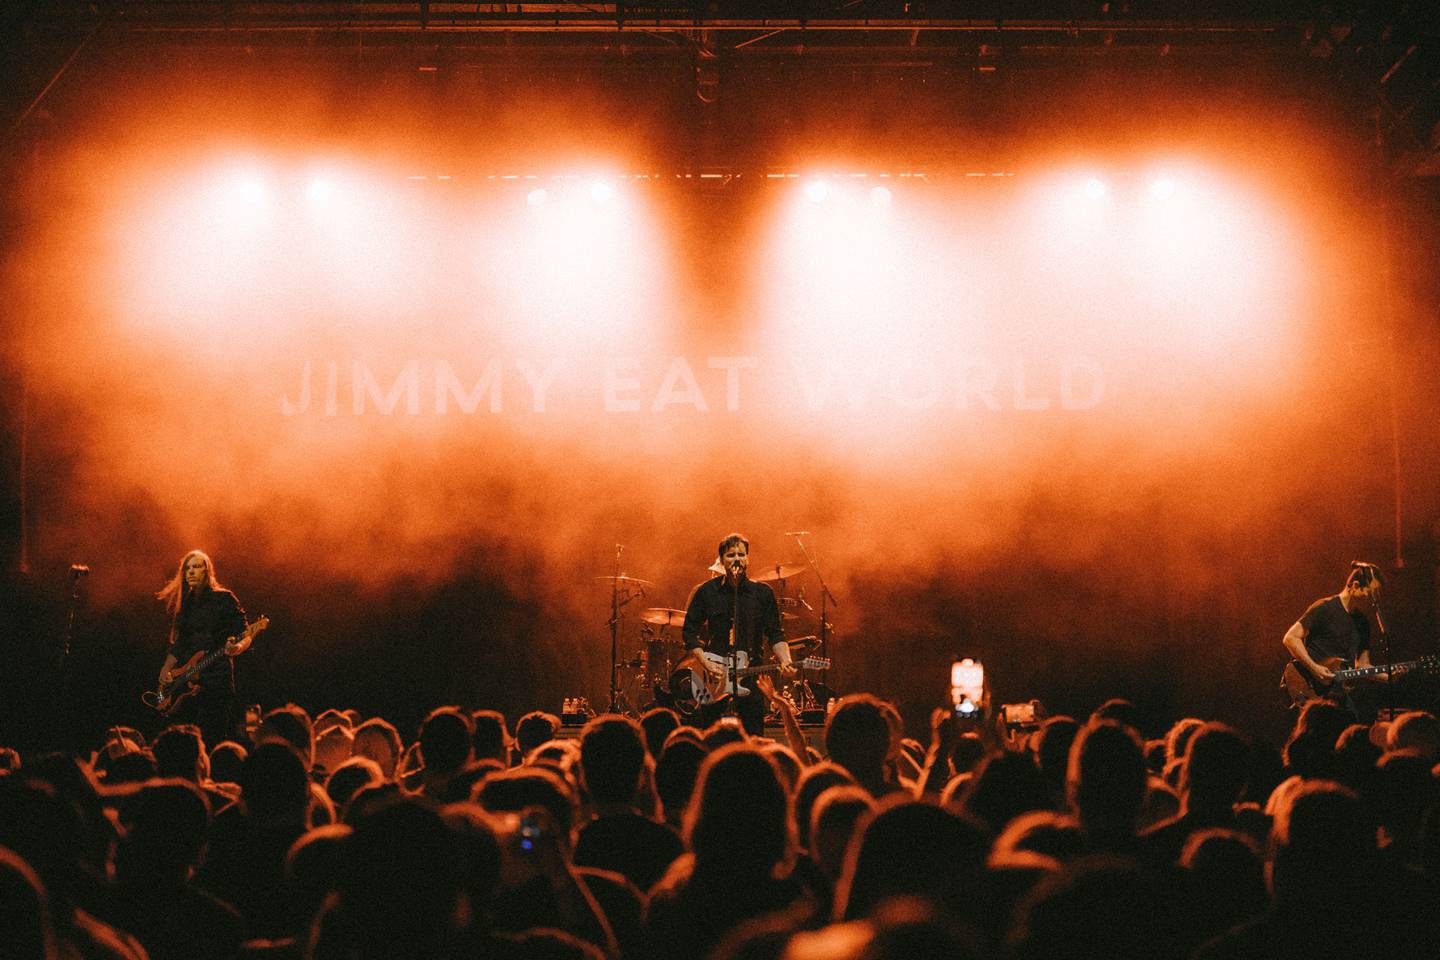 Q&A with Jimmy Eat World frontman Jim Adkins forward of Saturday’s live performance in Anchorage